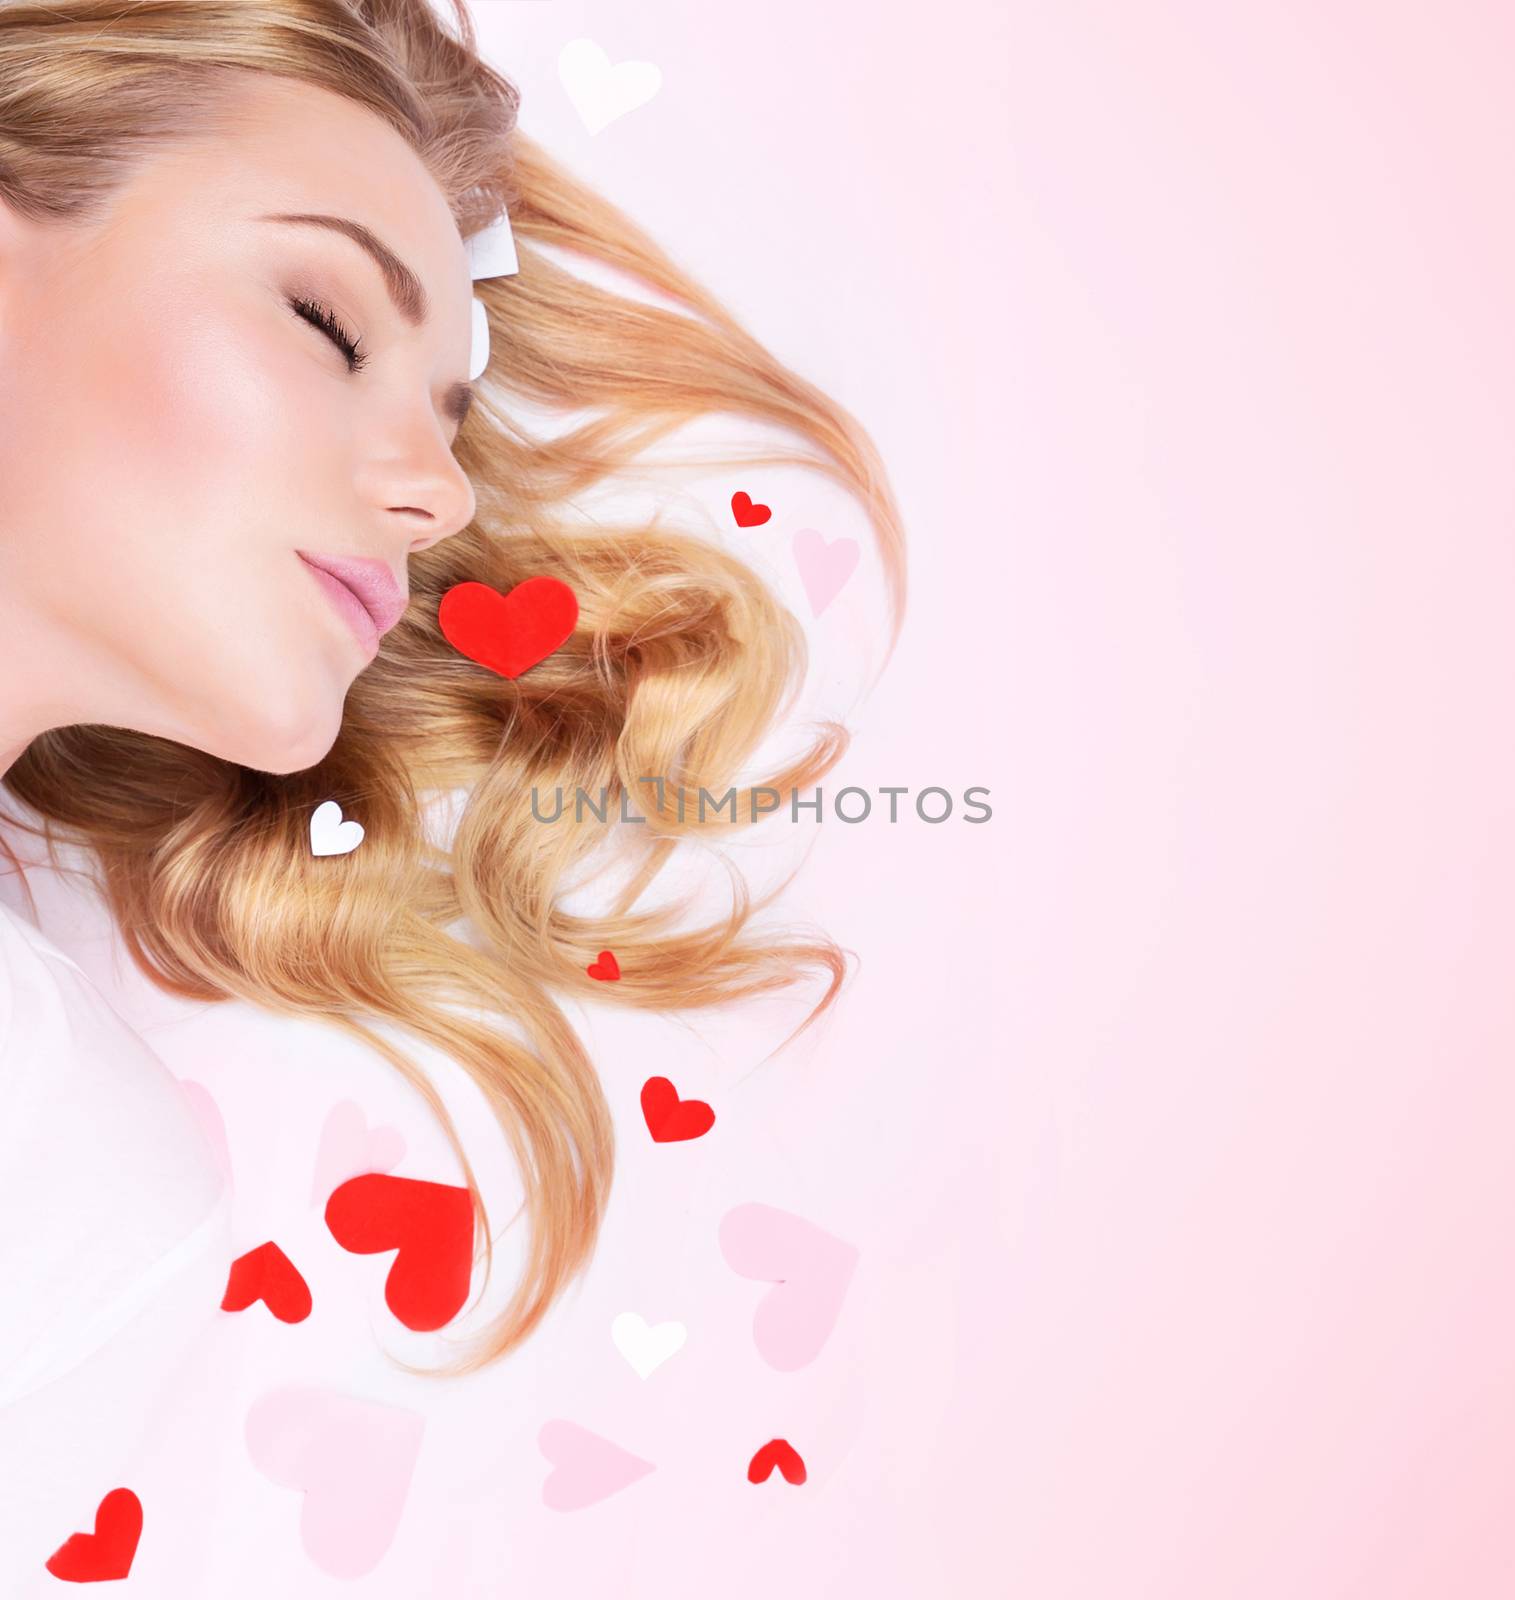 Romantic dreaming girl by Anna_Omelchenko